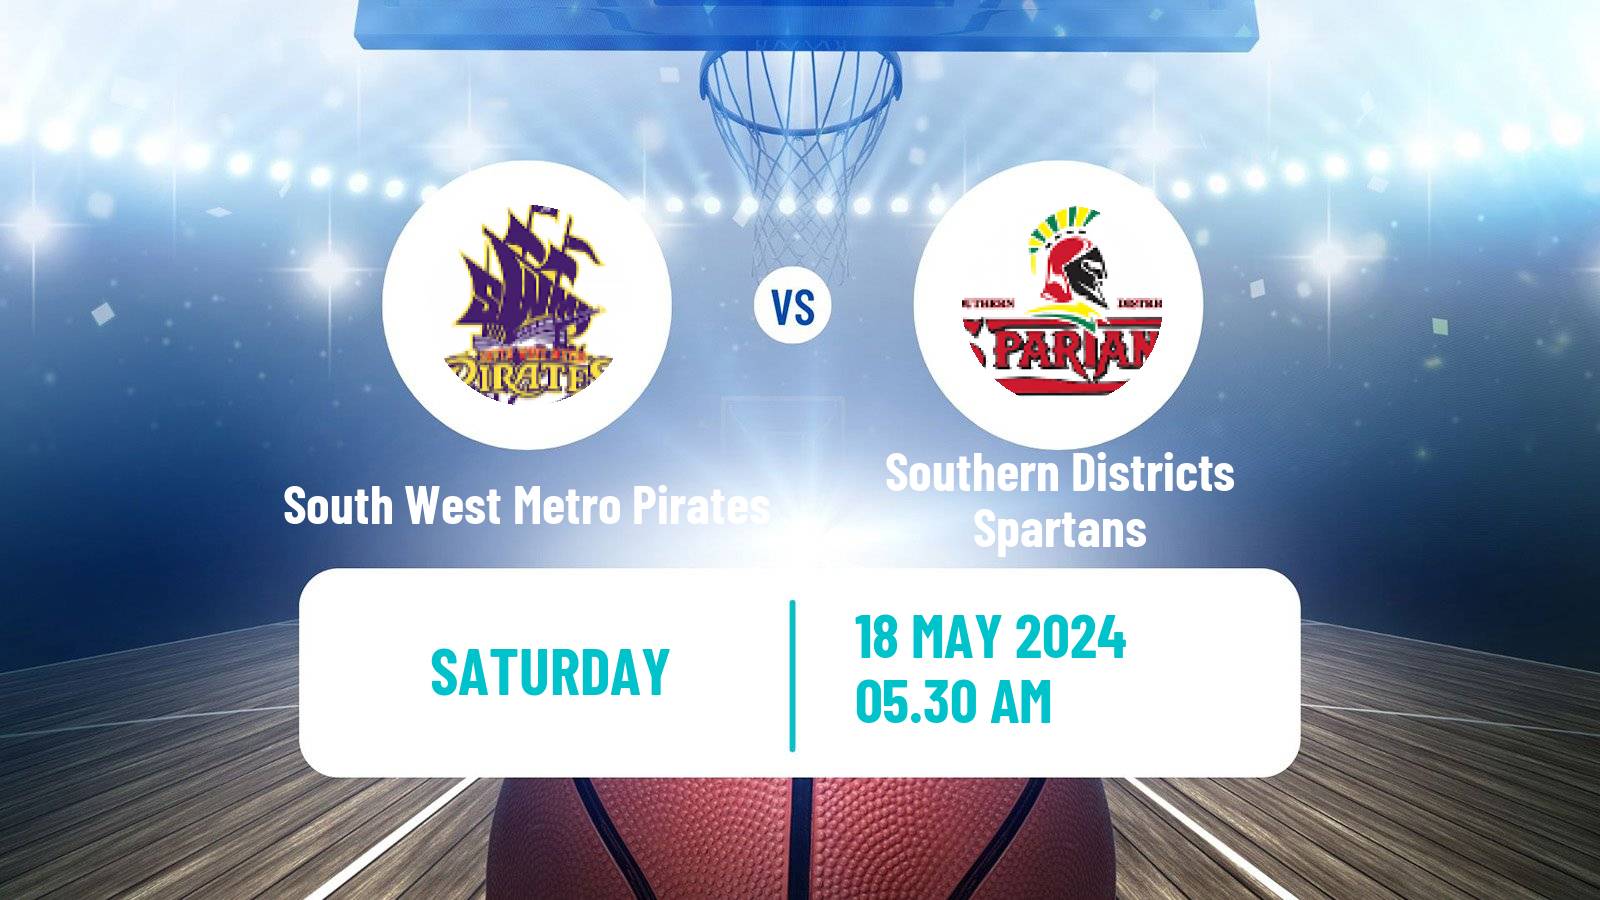 Basketball Australian NBL1 North South West Metro Pirates - Southern Districts Spartans